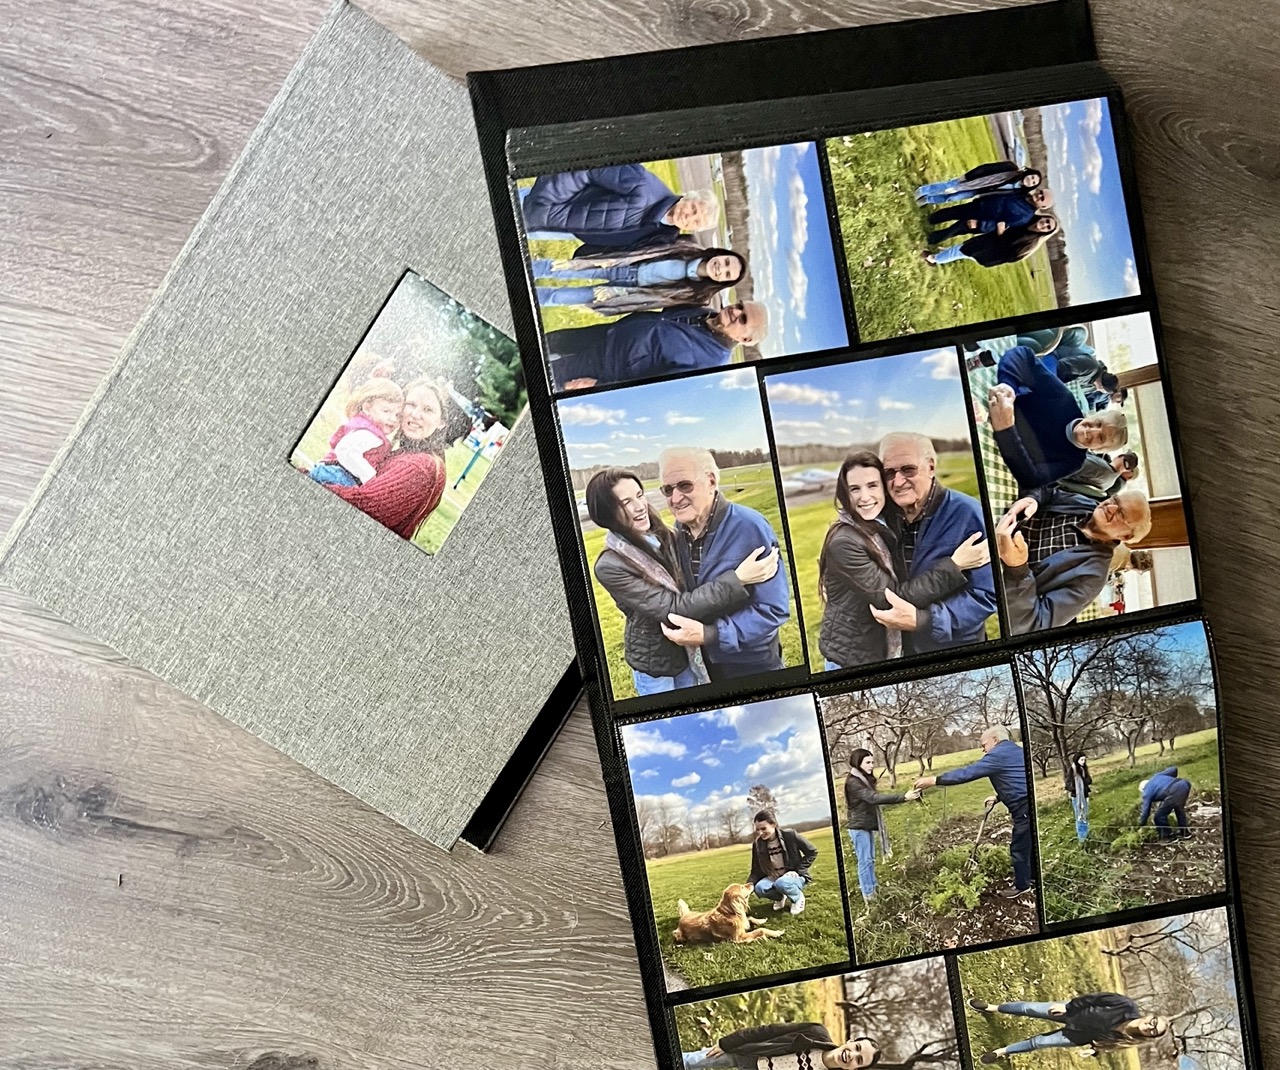 Printing pictures and putting them in a photo album